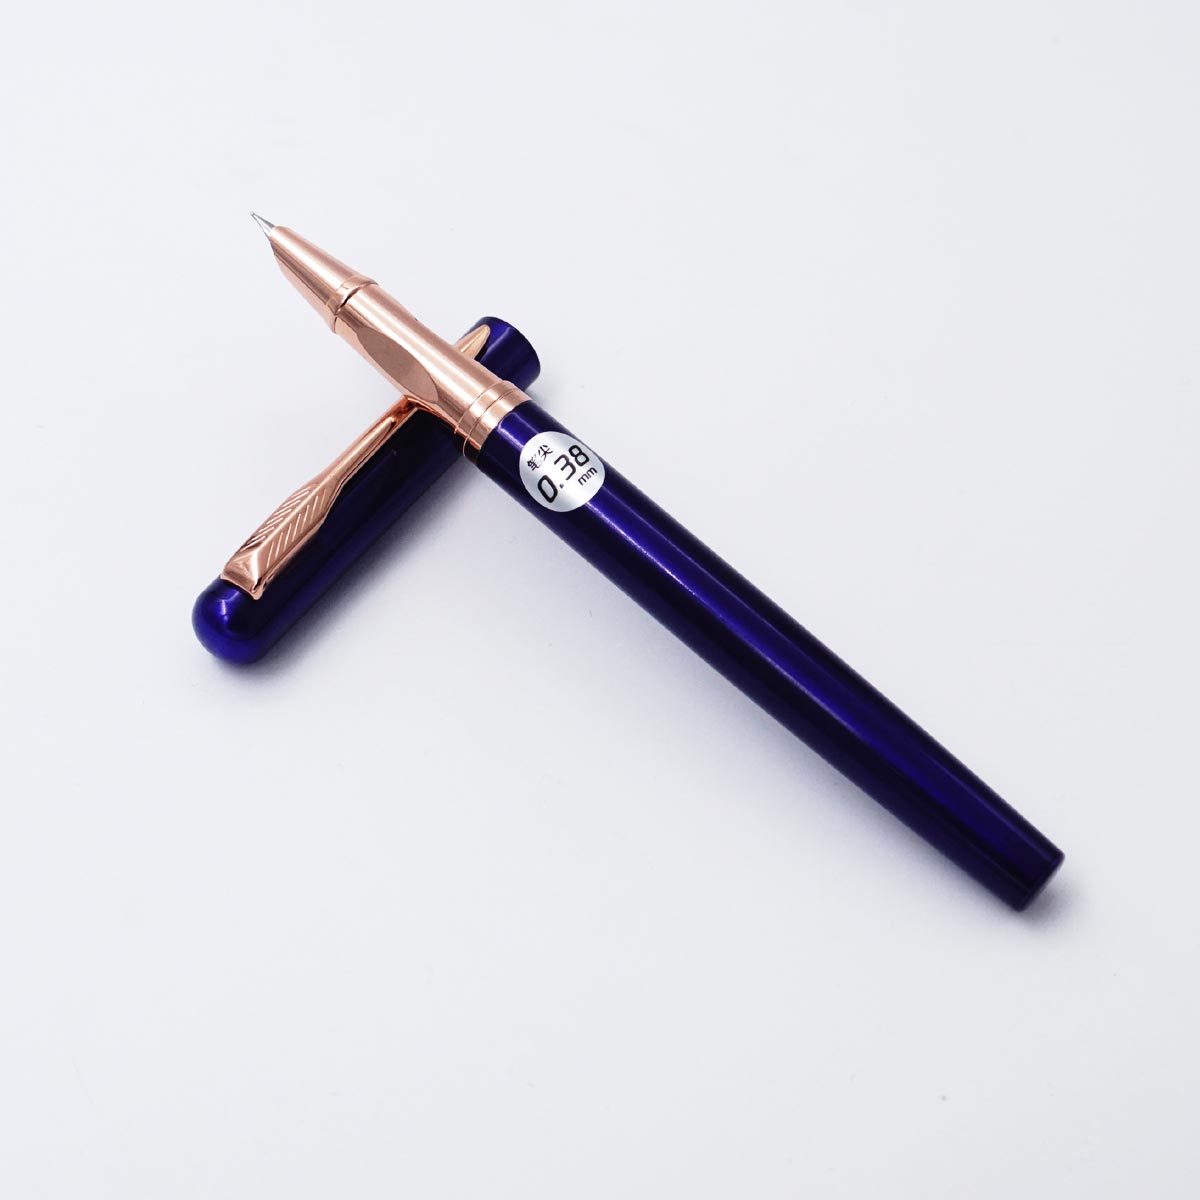 Luoshi 5313 Glossy Navy Blue Color Body With Copper Clip And Grip 0.38mm Fine Nip Converter Type Fountain Pen SKU 25671